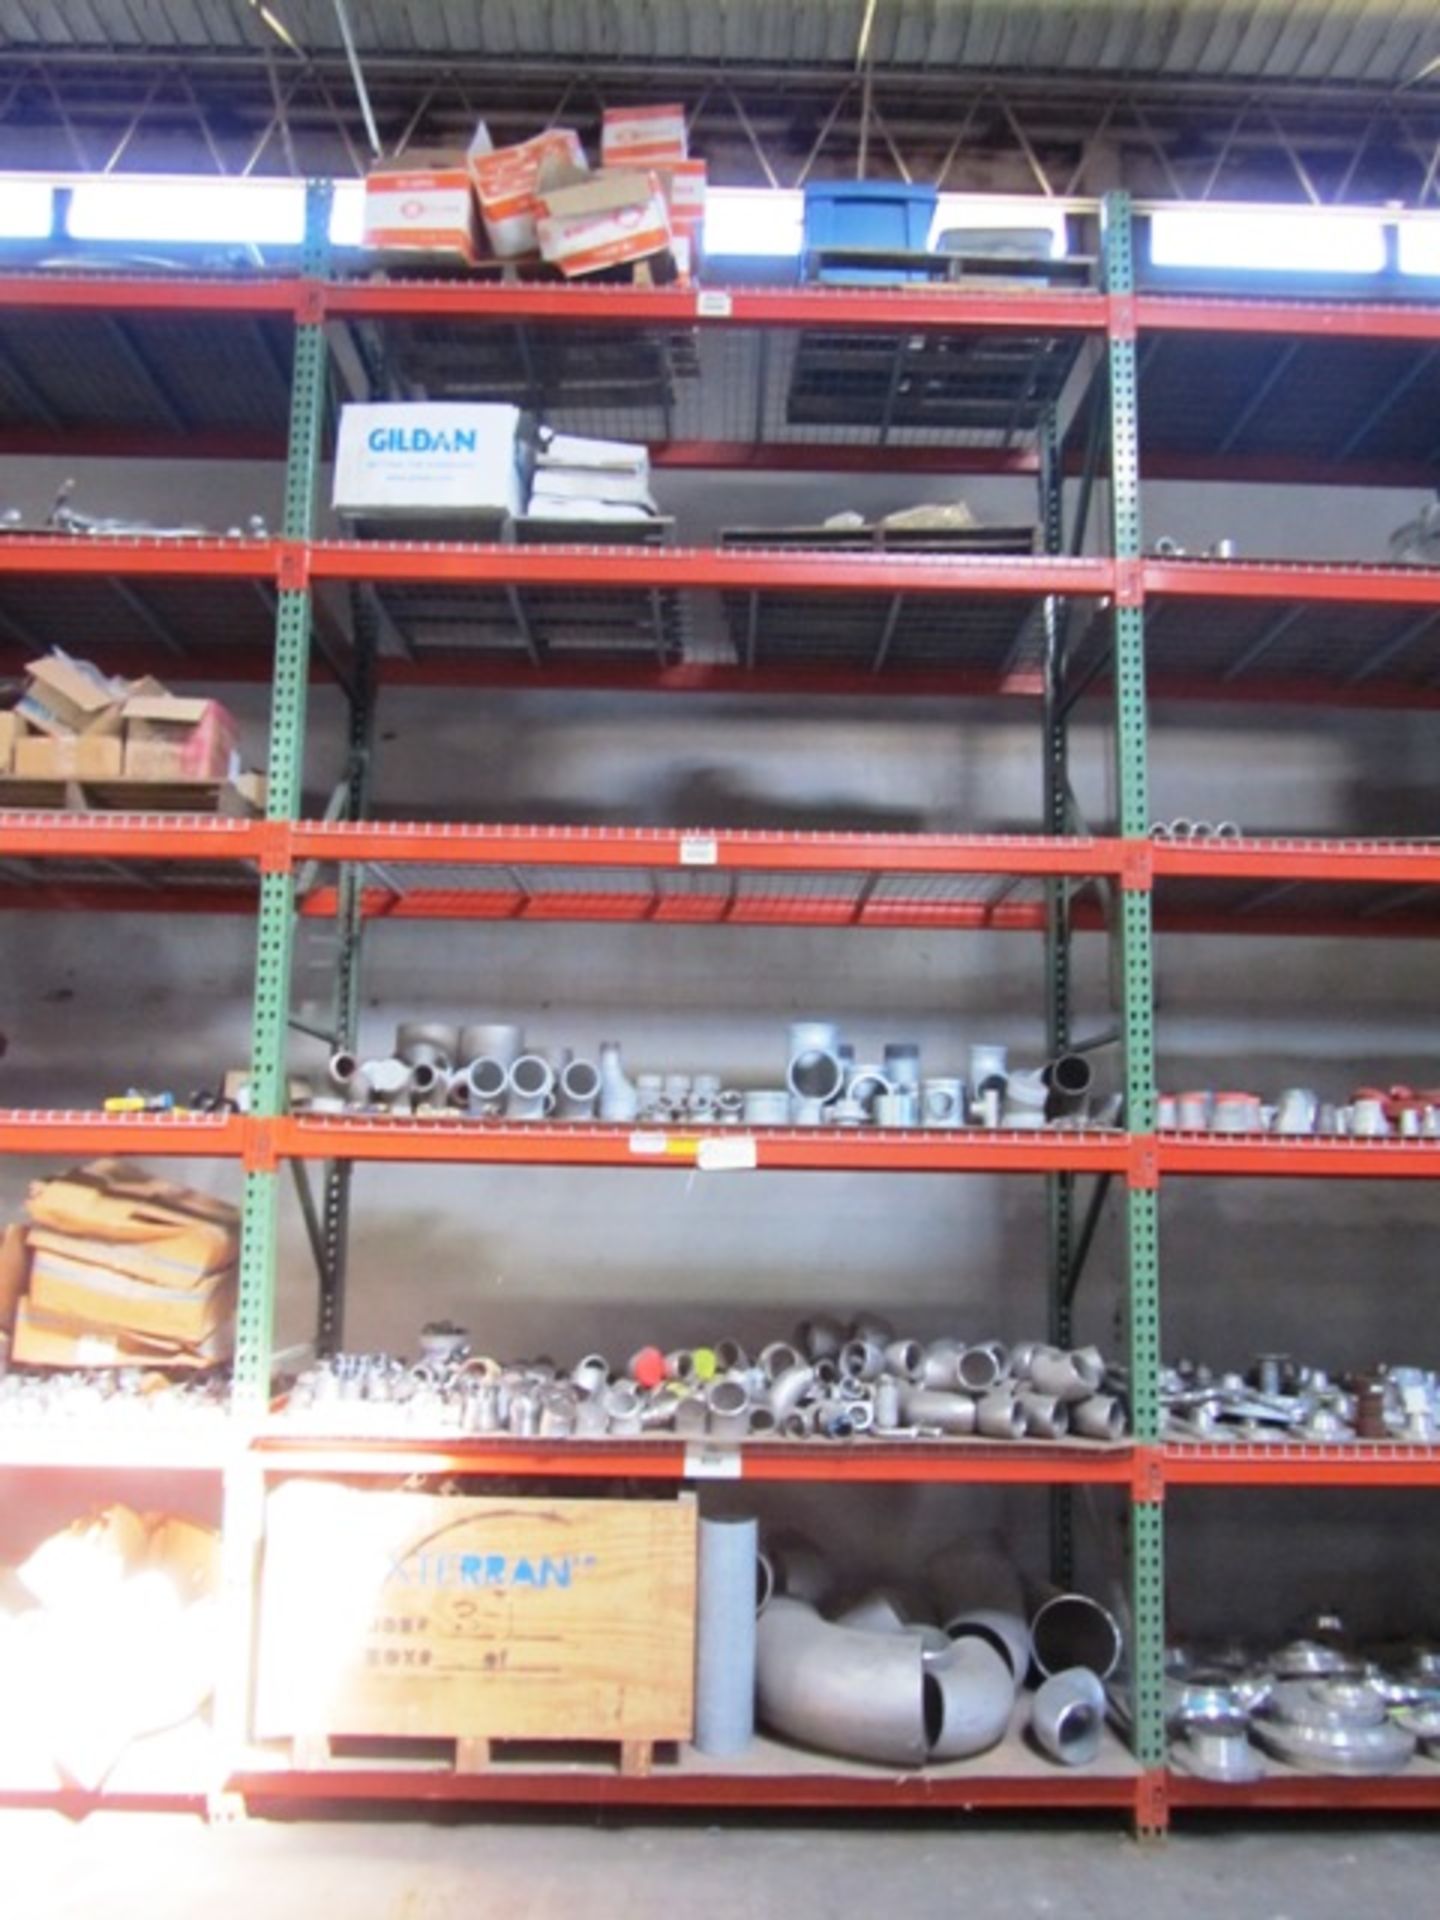 Contents of 5 Vertical Sections Pallet Racking consisting of Elbows, Etc.